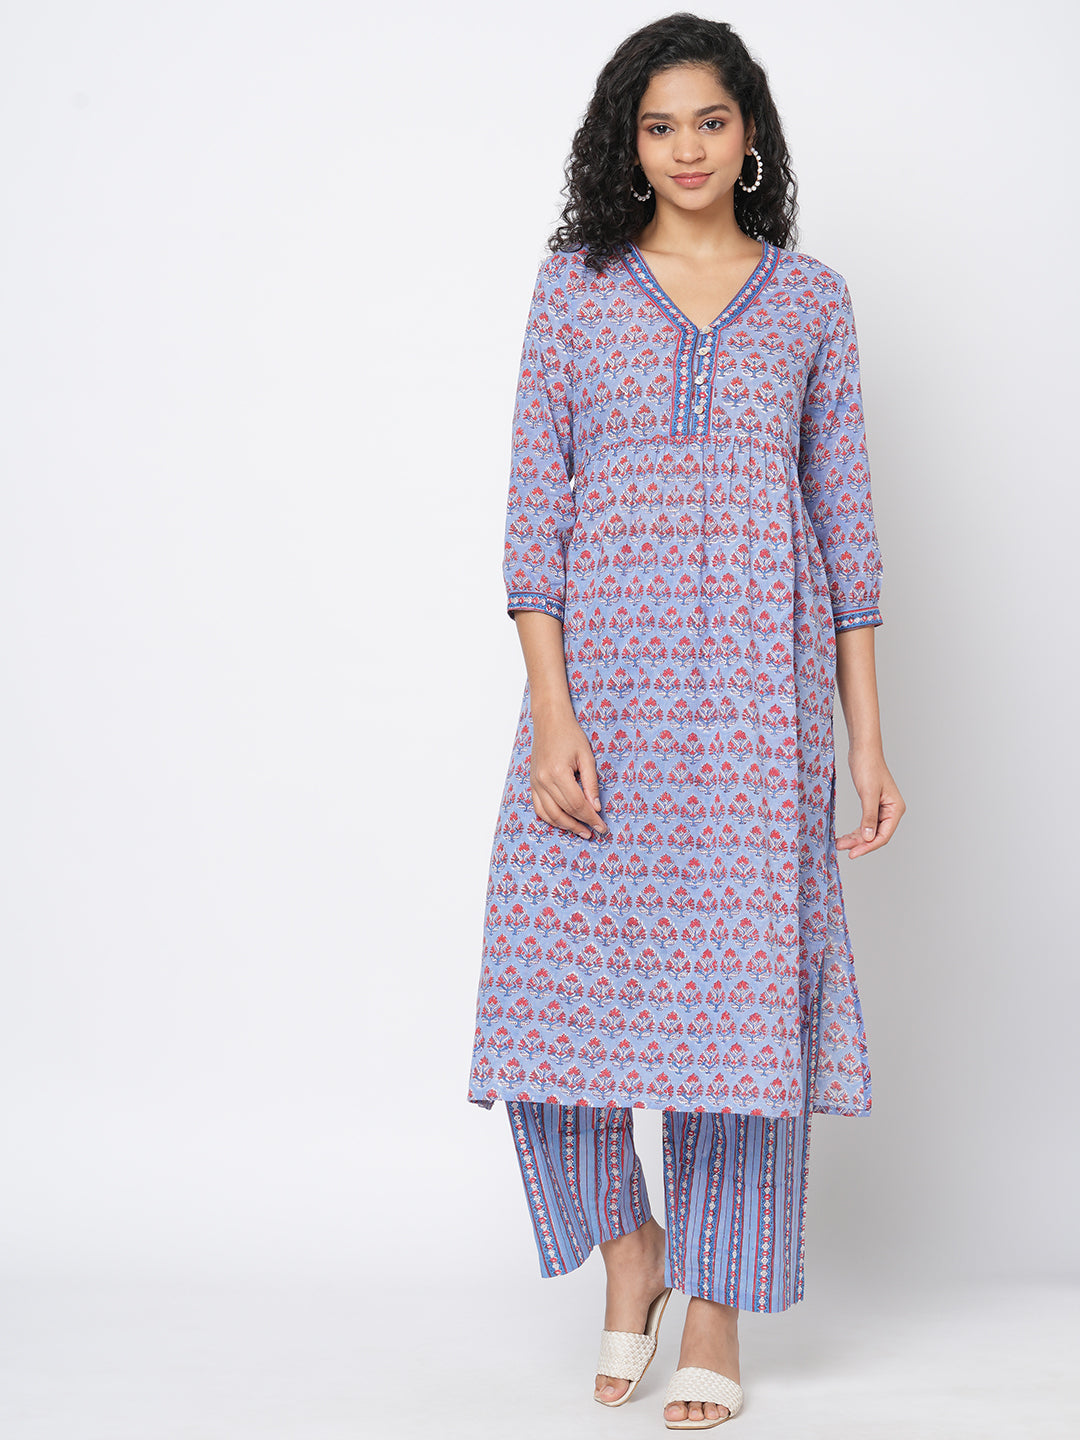 Fancy Cotton Printed Long Kurti For Women at Rs.999/Piece in bellary offer  by Prestige Ladies Showroom